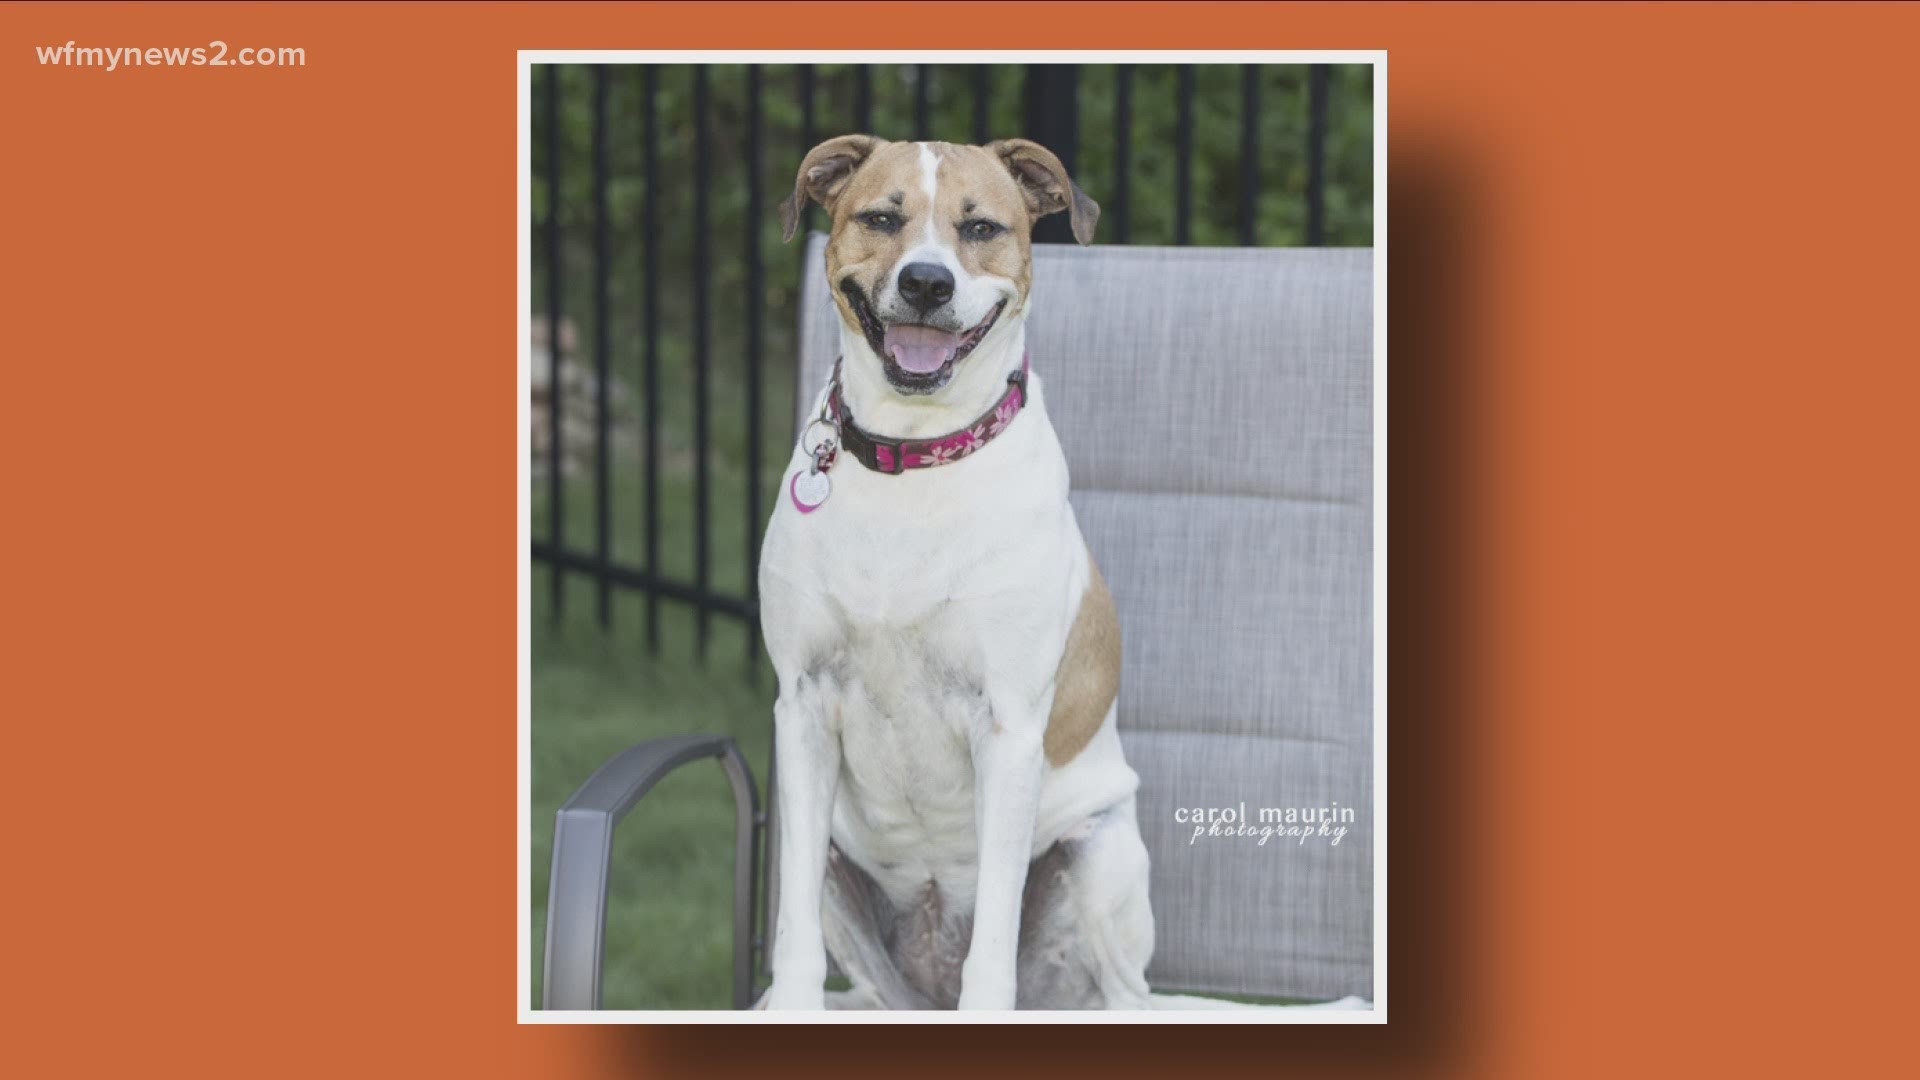 She's a 6-year-old who loves to pretend she's a puppy. Help her find her forever home.